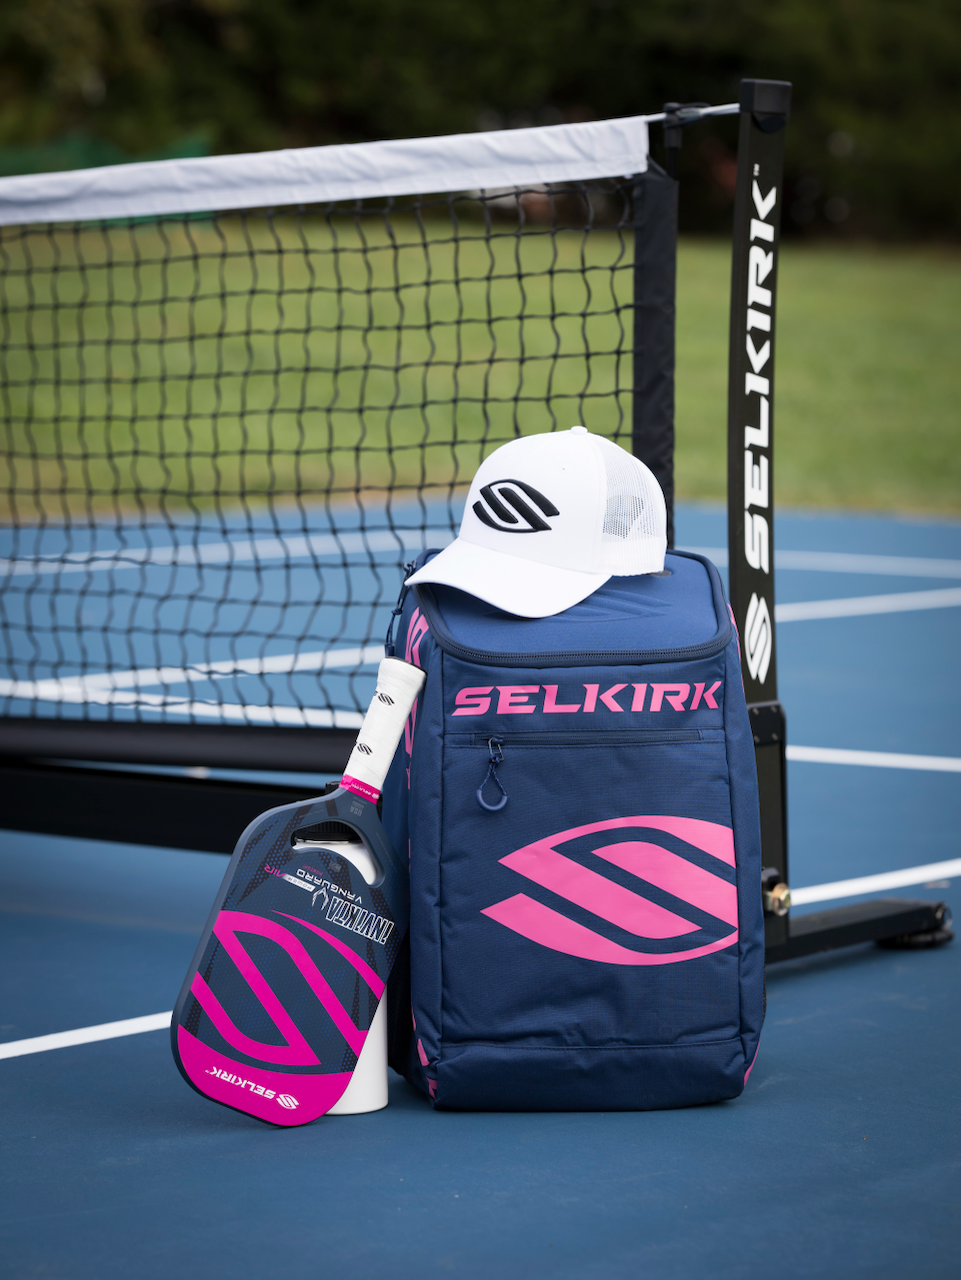 Selkirk Sport Prestige pickleball bags in navy blue and pink, with a Selkirk pickleball paddle, hat, and pickleball net.